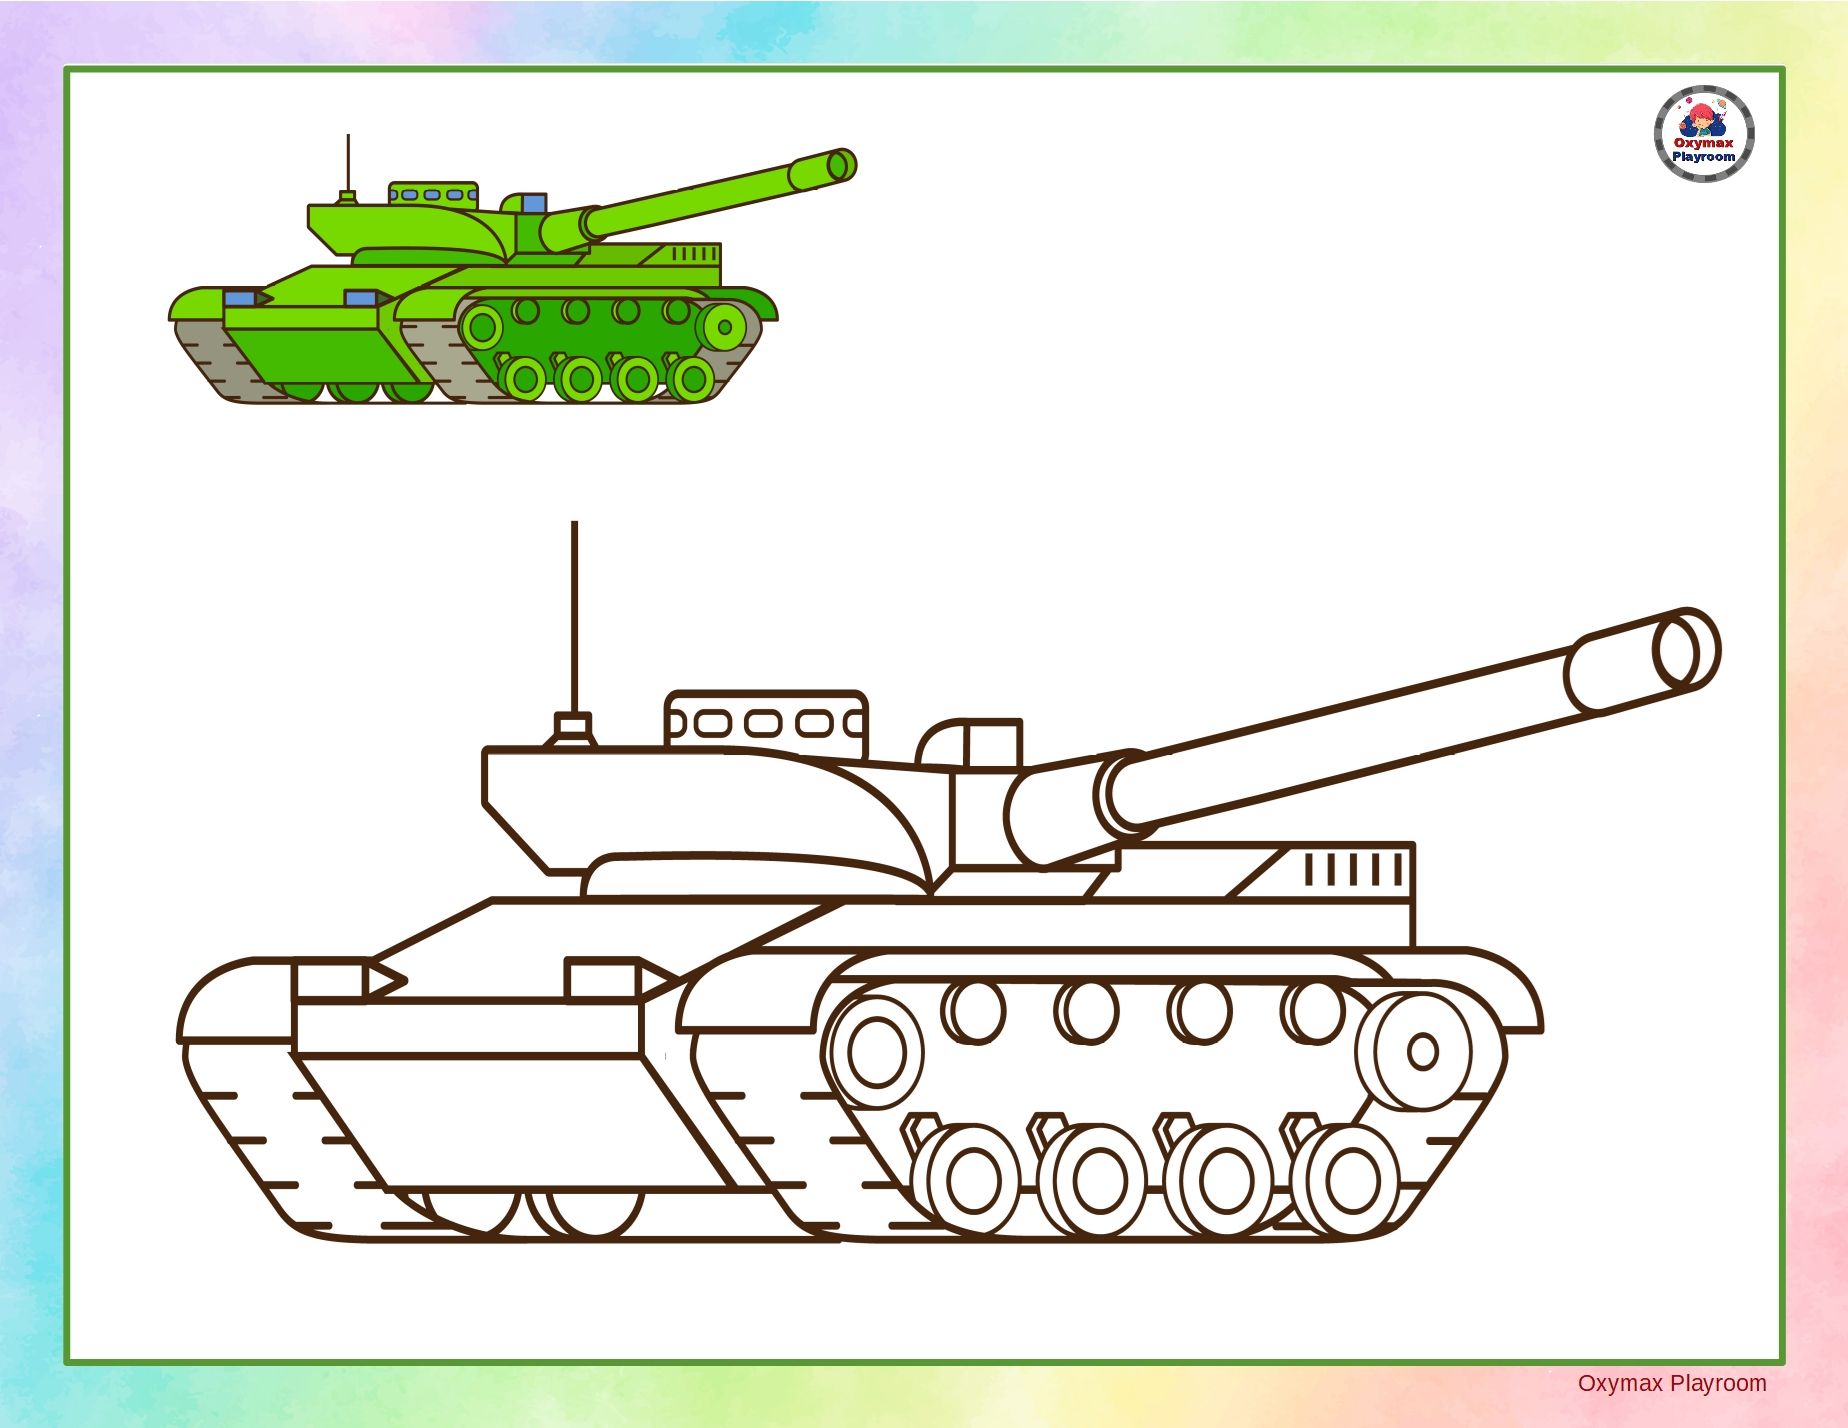 50 Free Coloring Pages for Kids – Transportation